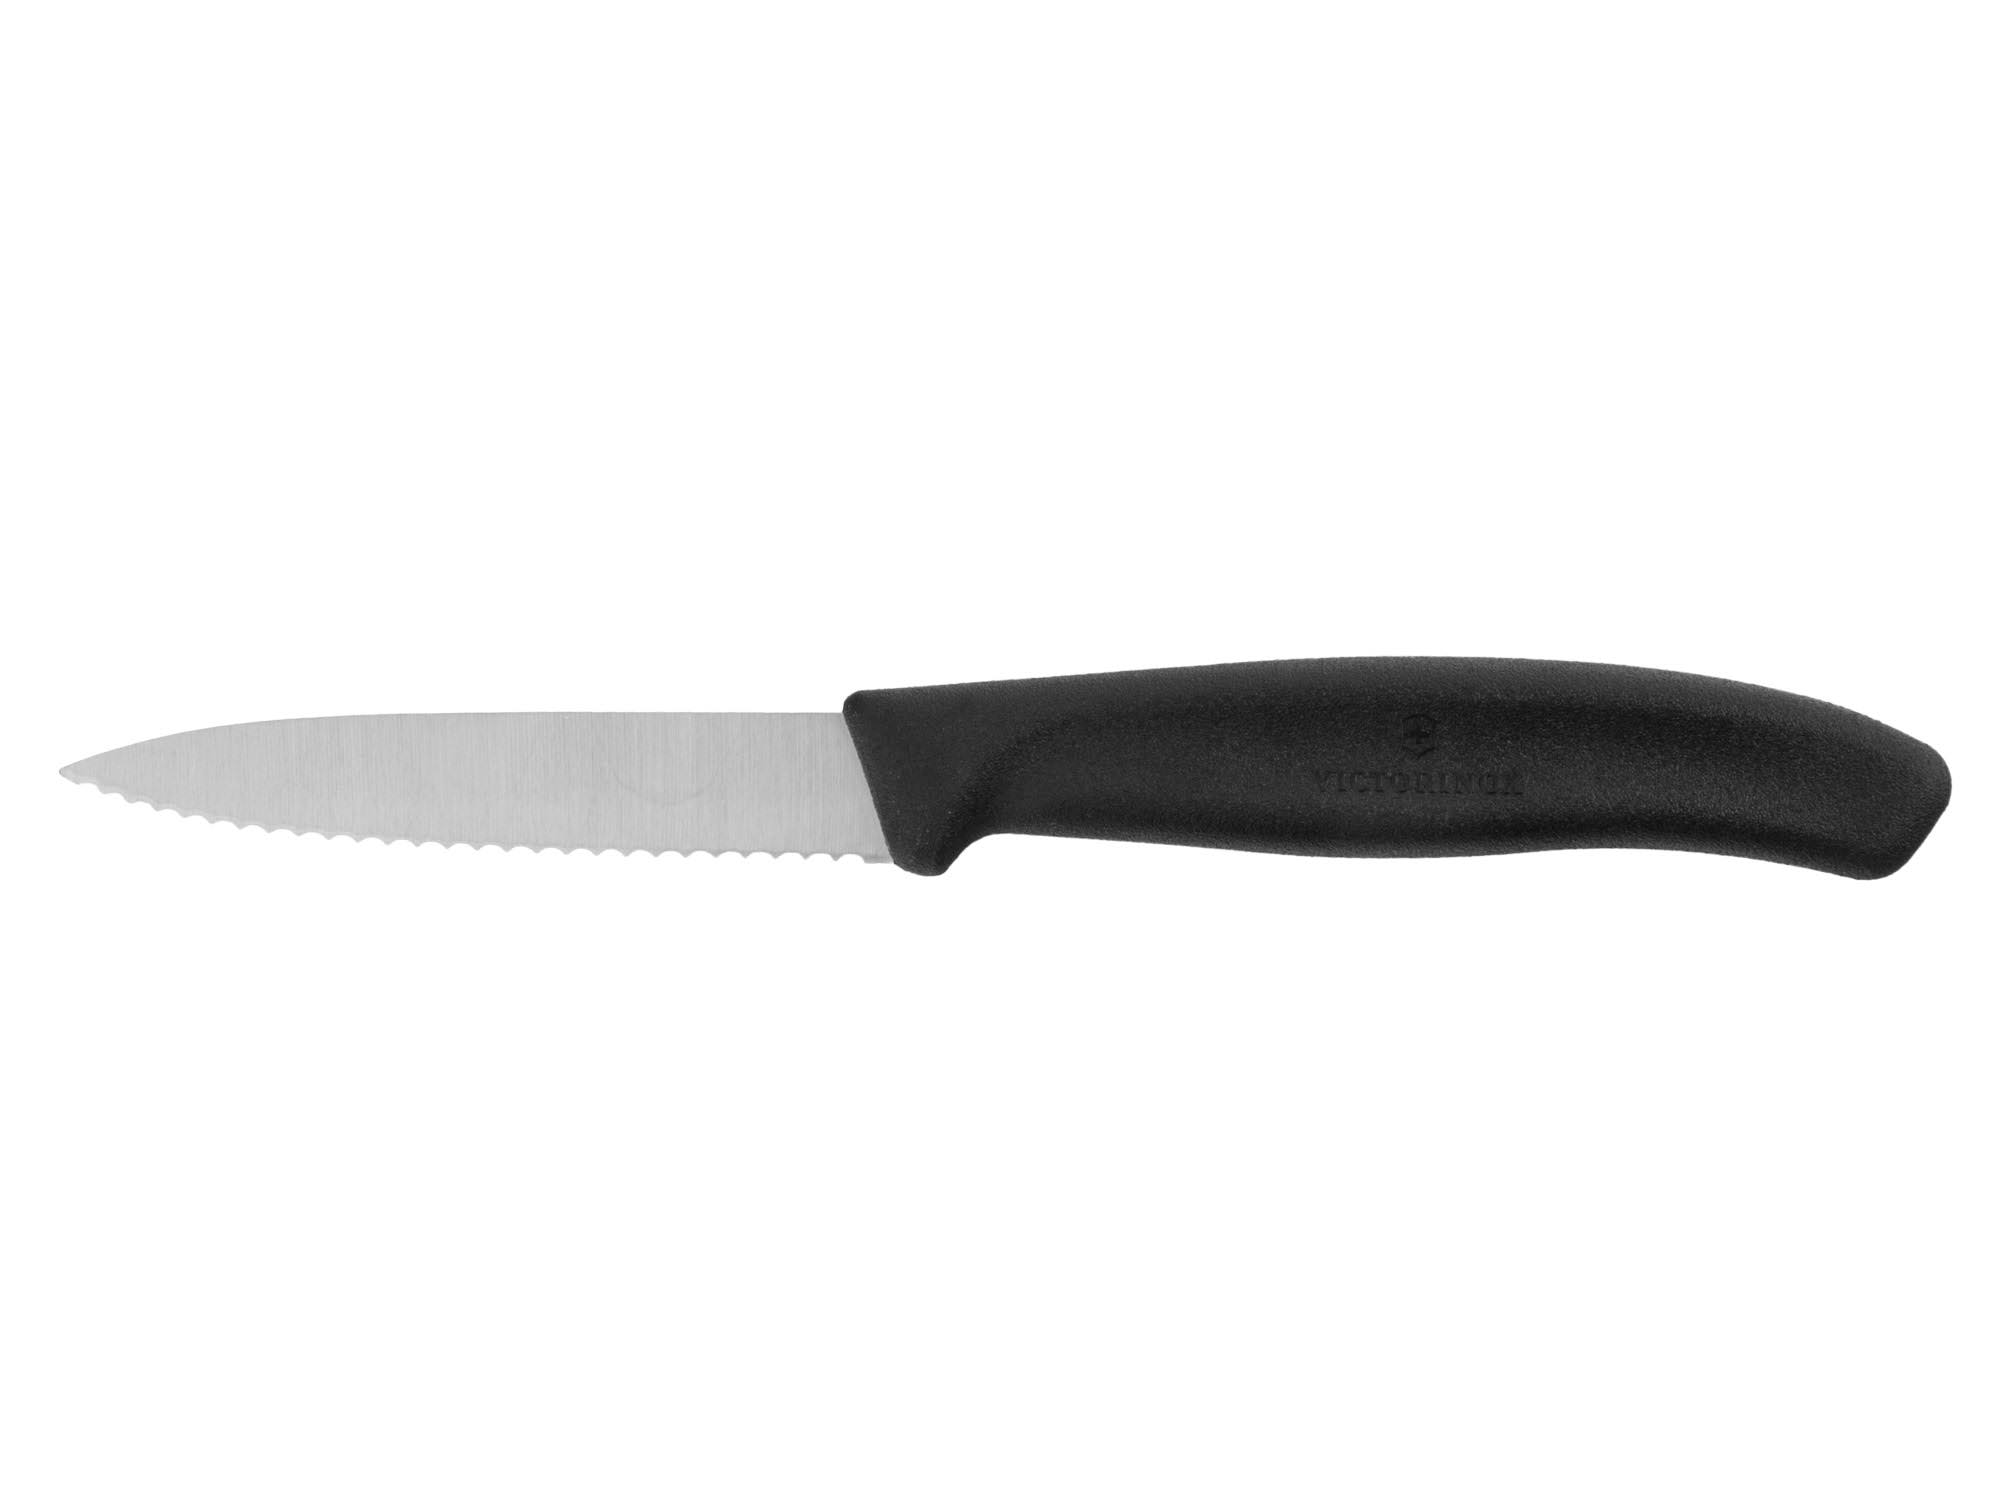 Victorinox Classic Pointed Tip Wavy Paring Knife - 8cm